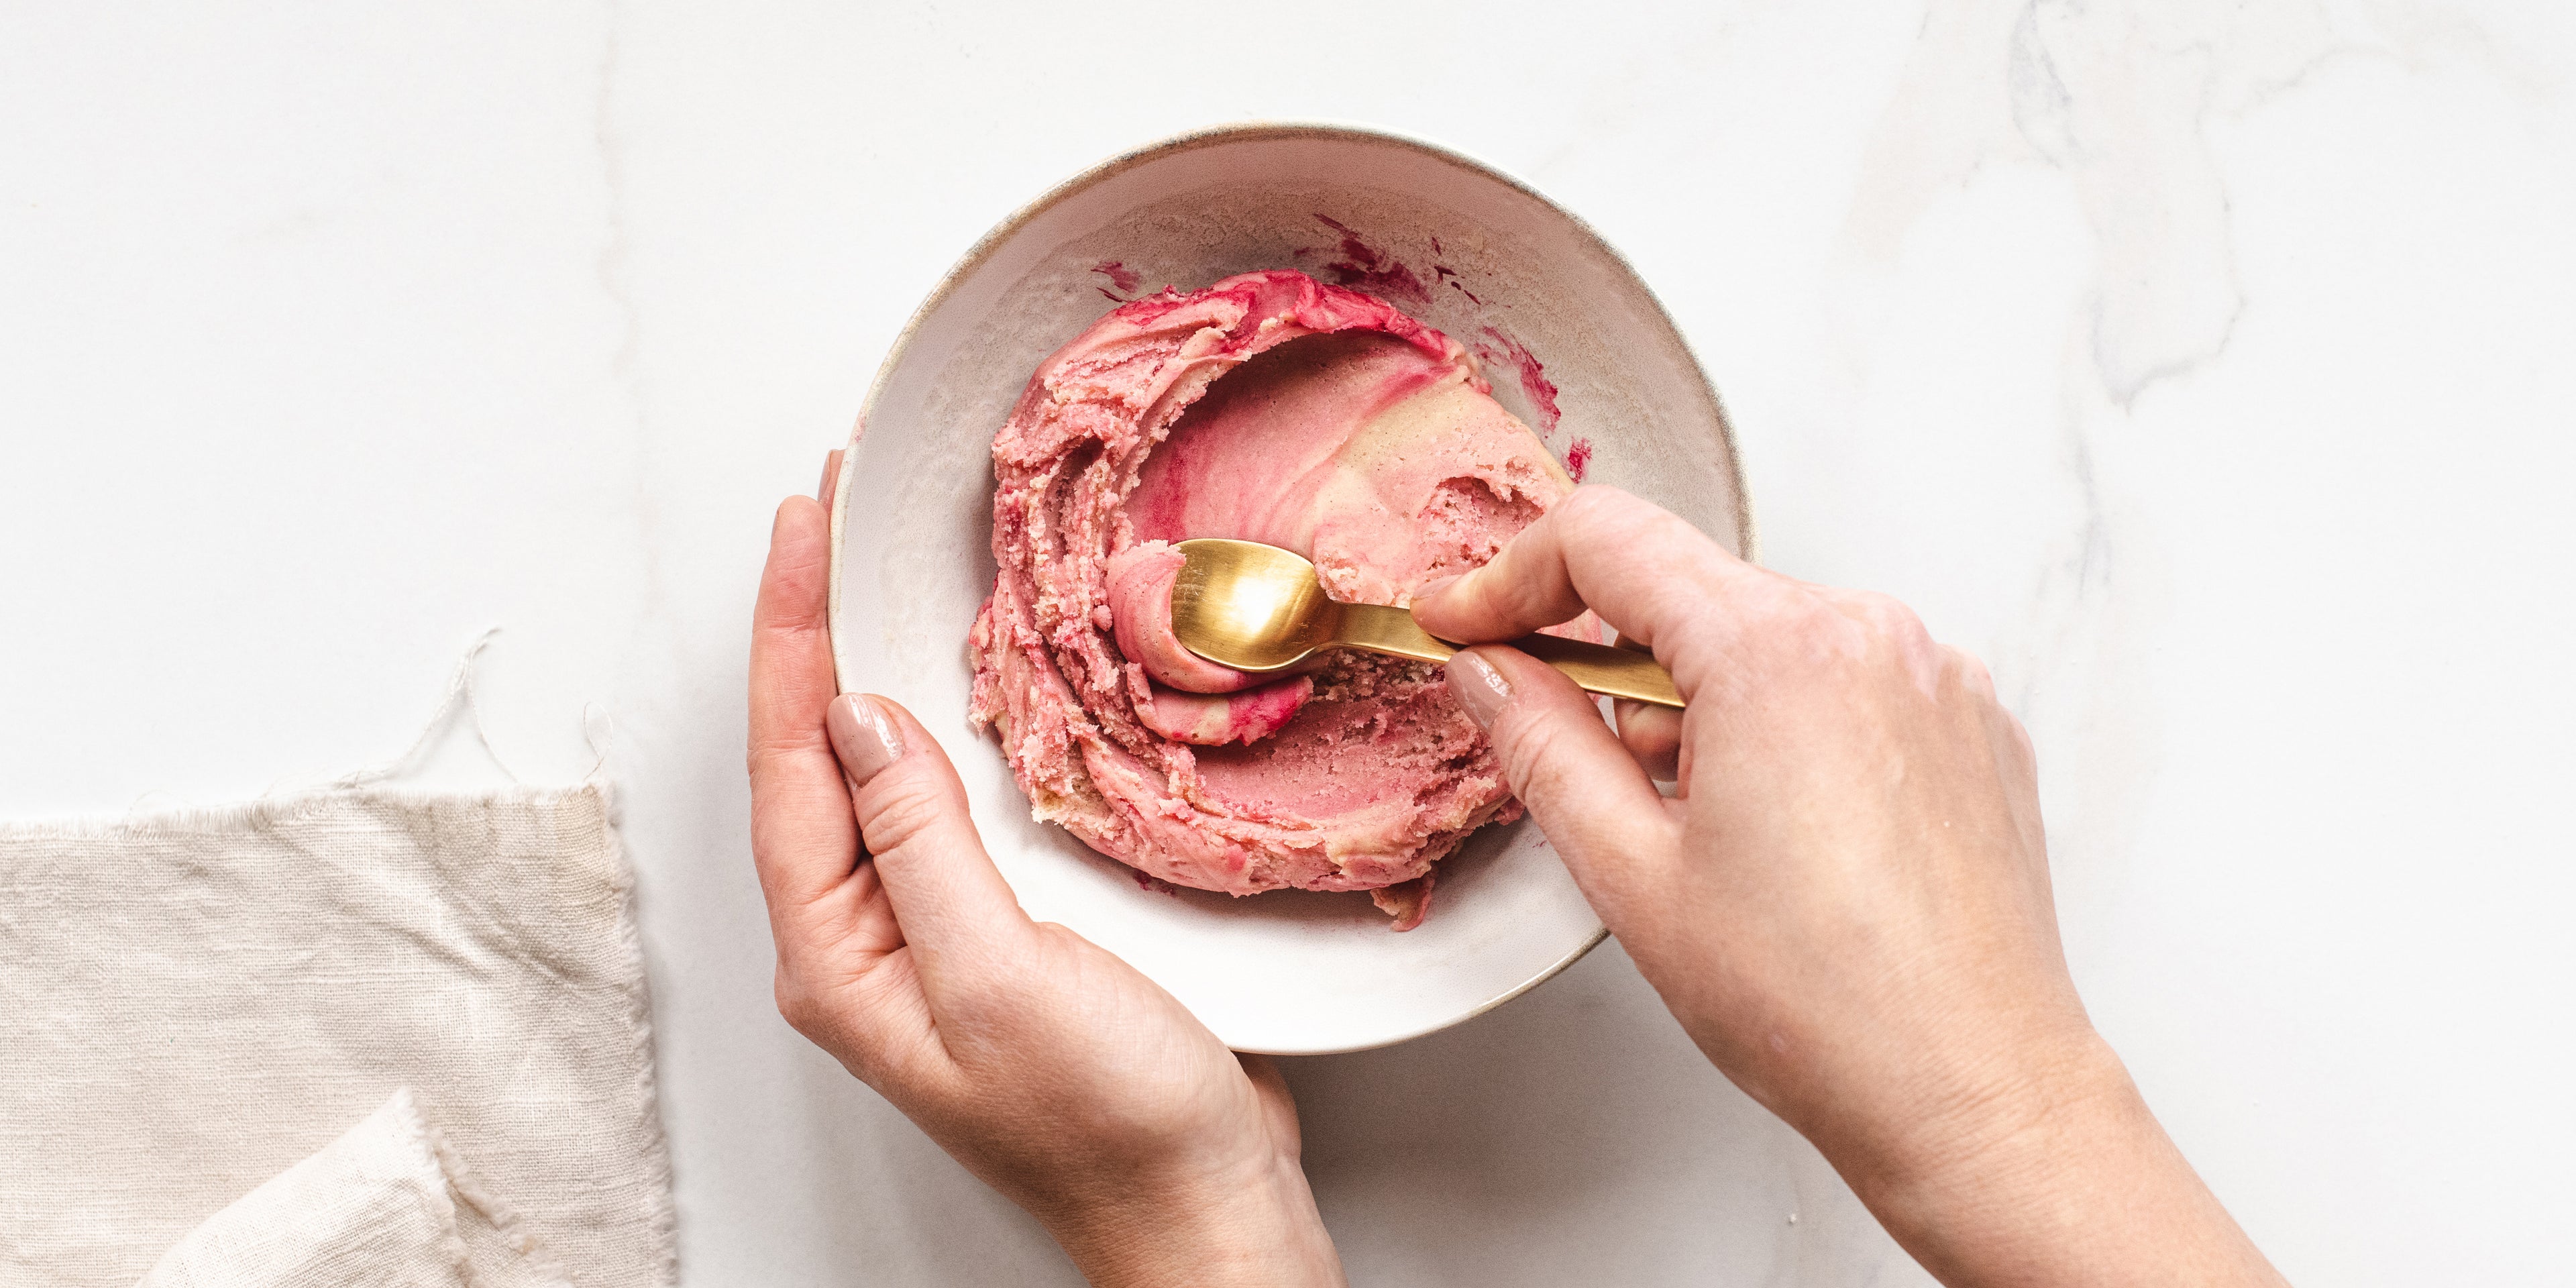 Hands holding a bowl, mixing up the pink layer to apply to the Conchas and decorate.